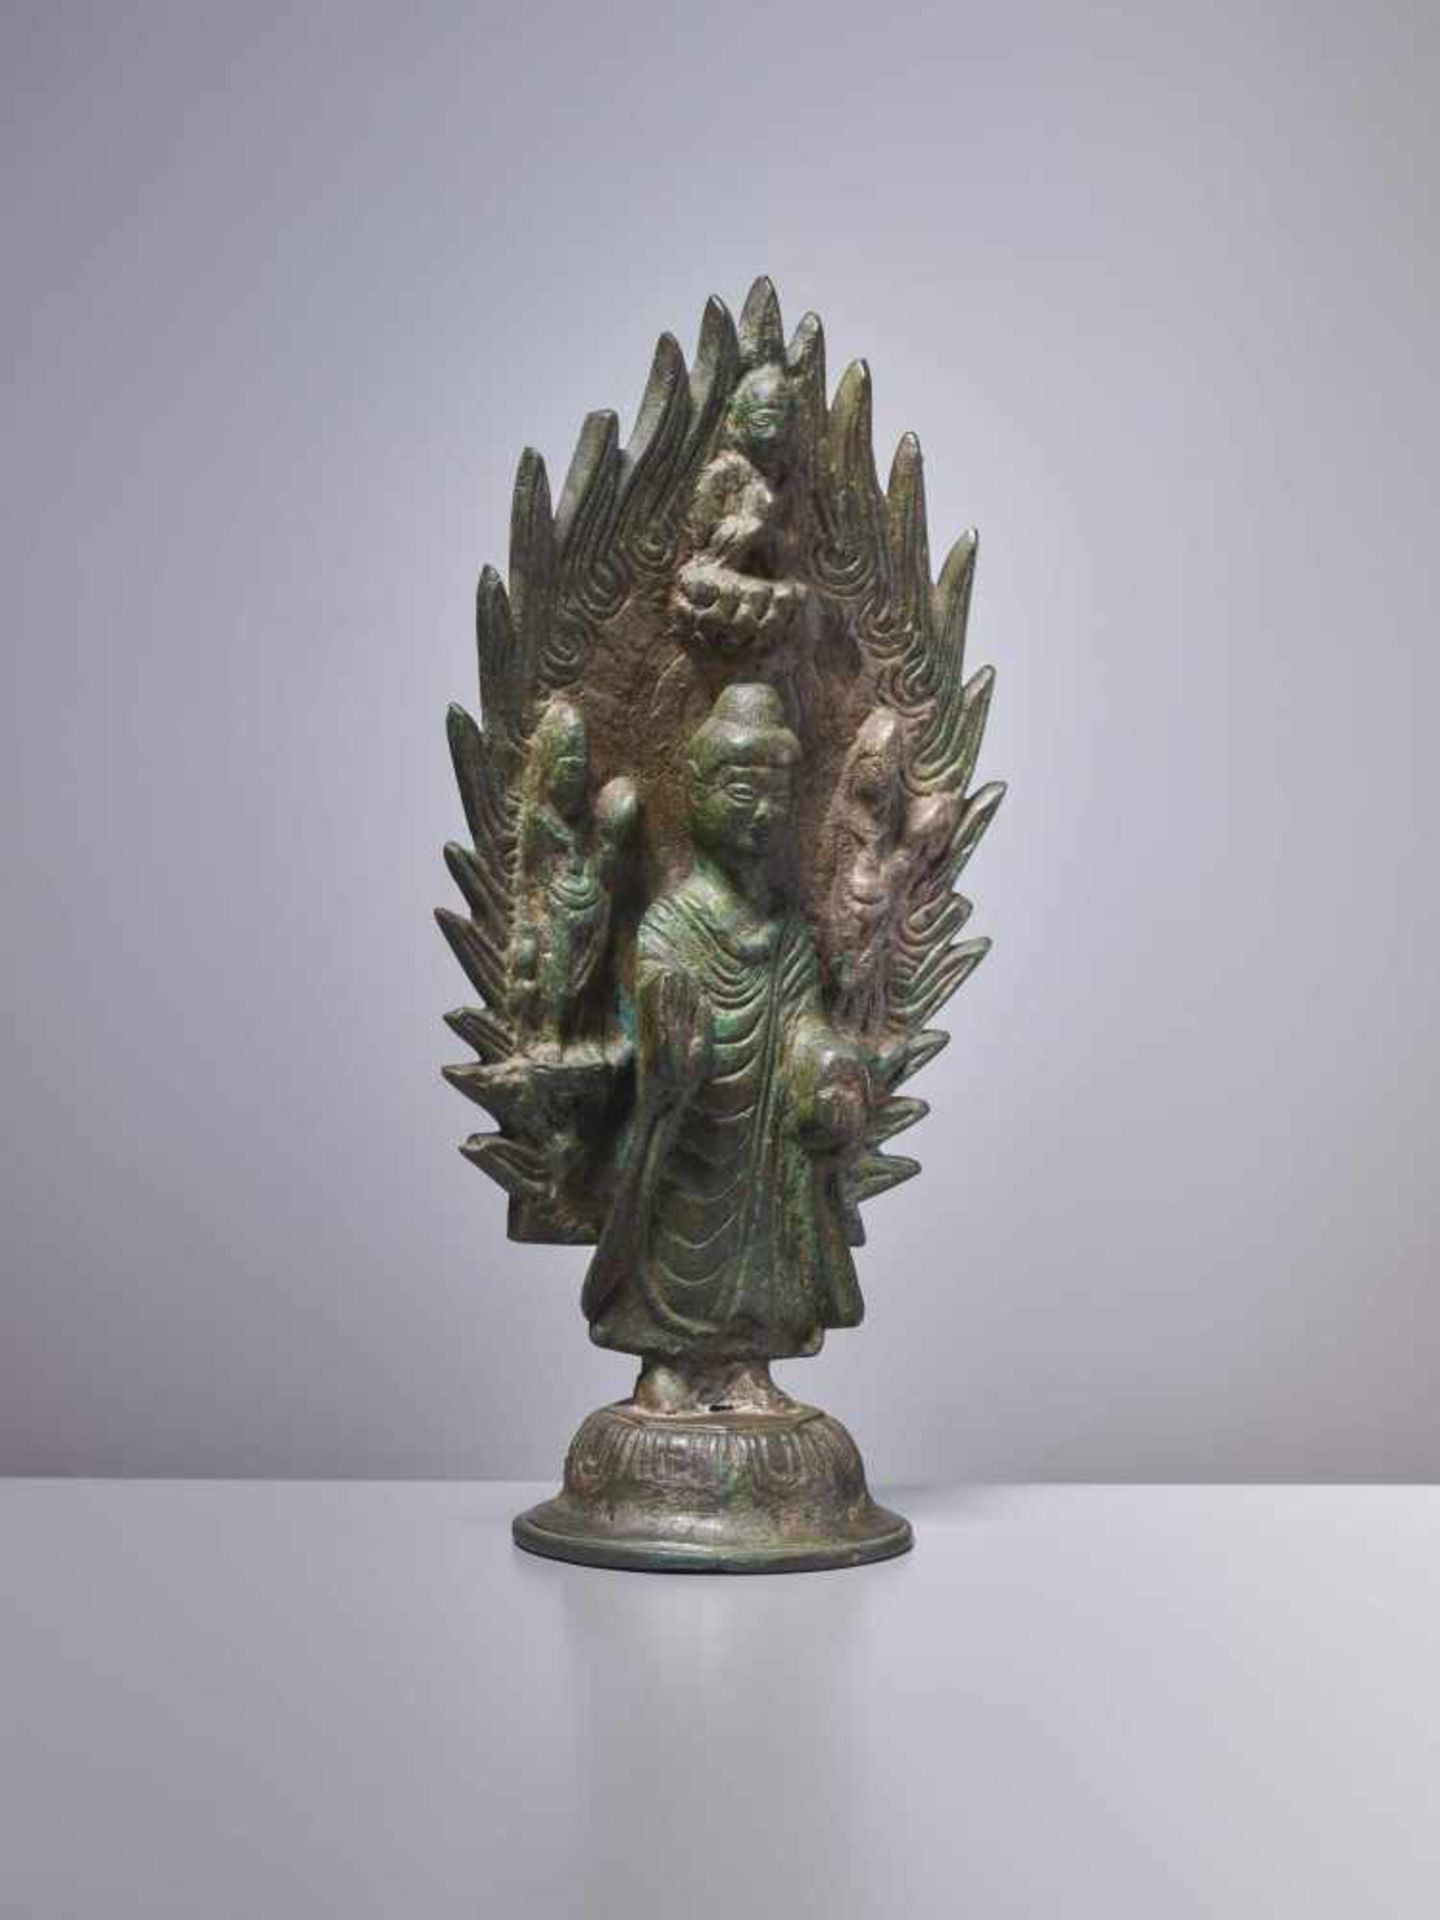 A BRONZE BUDDHA STANDING IN FRONT OF A FLAMING HALO, DATED 571 Cast and incised bronze with a rich - Image 3 of 7